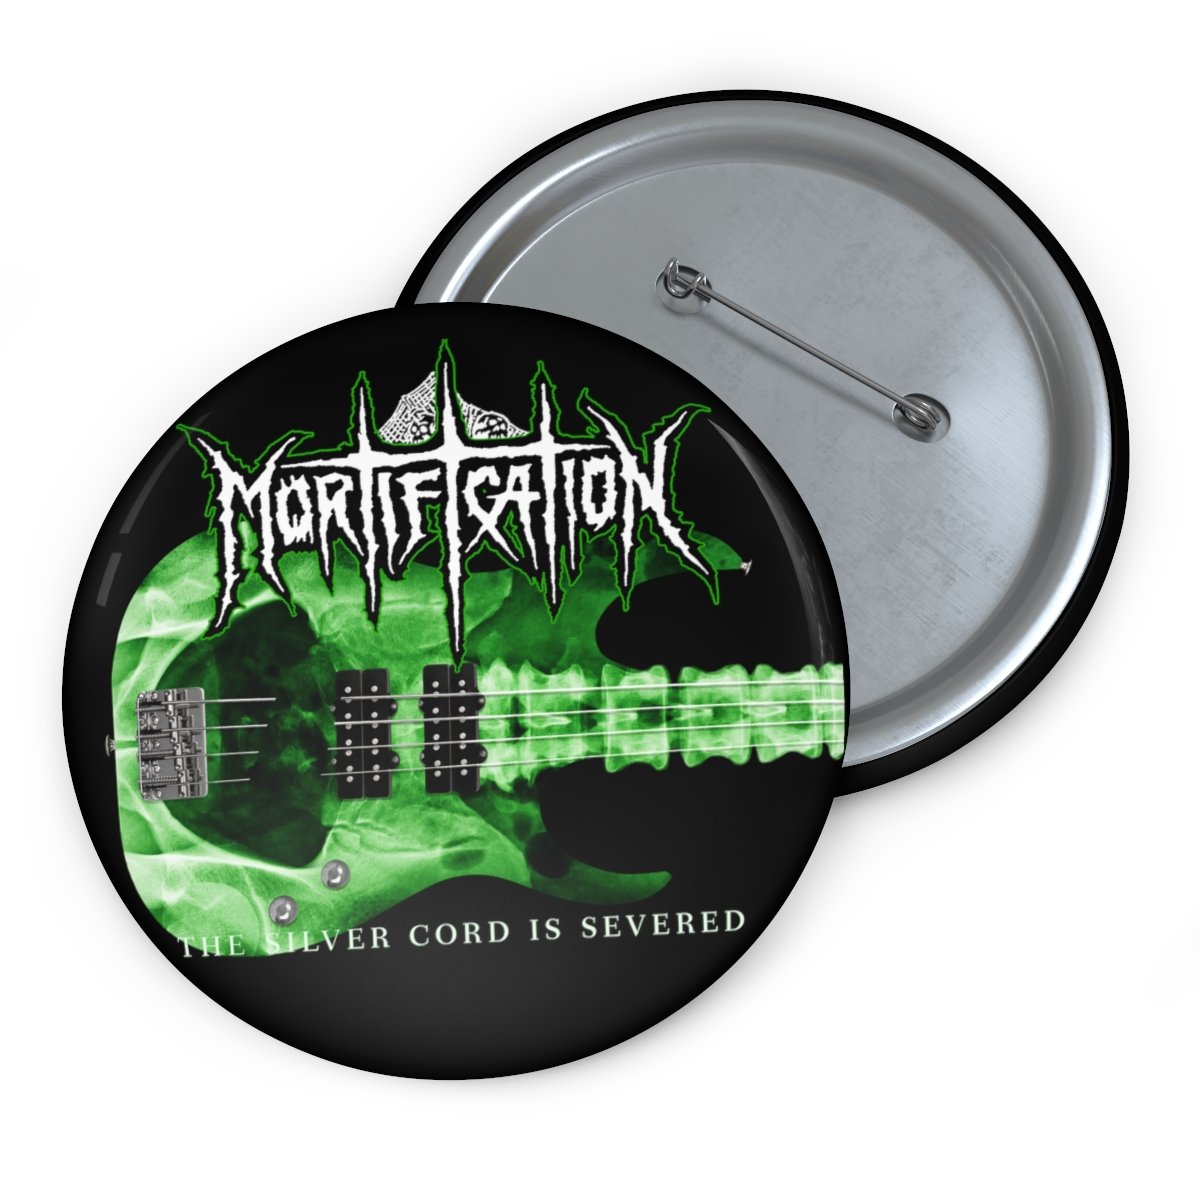 Mortification – The Silver Cord is Severed 2021 Pin Buttons